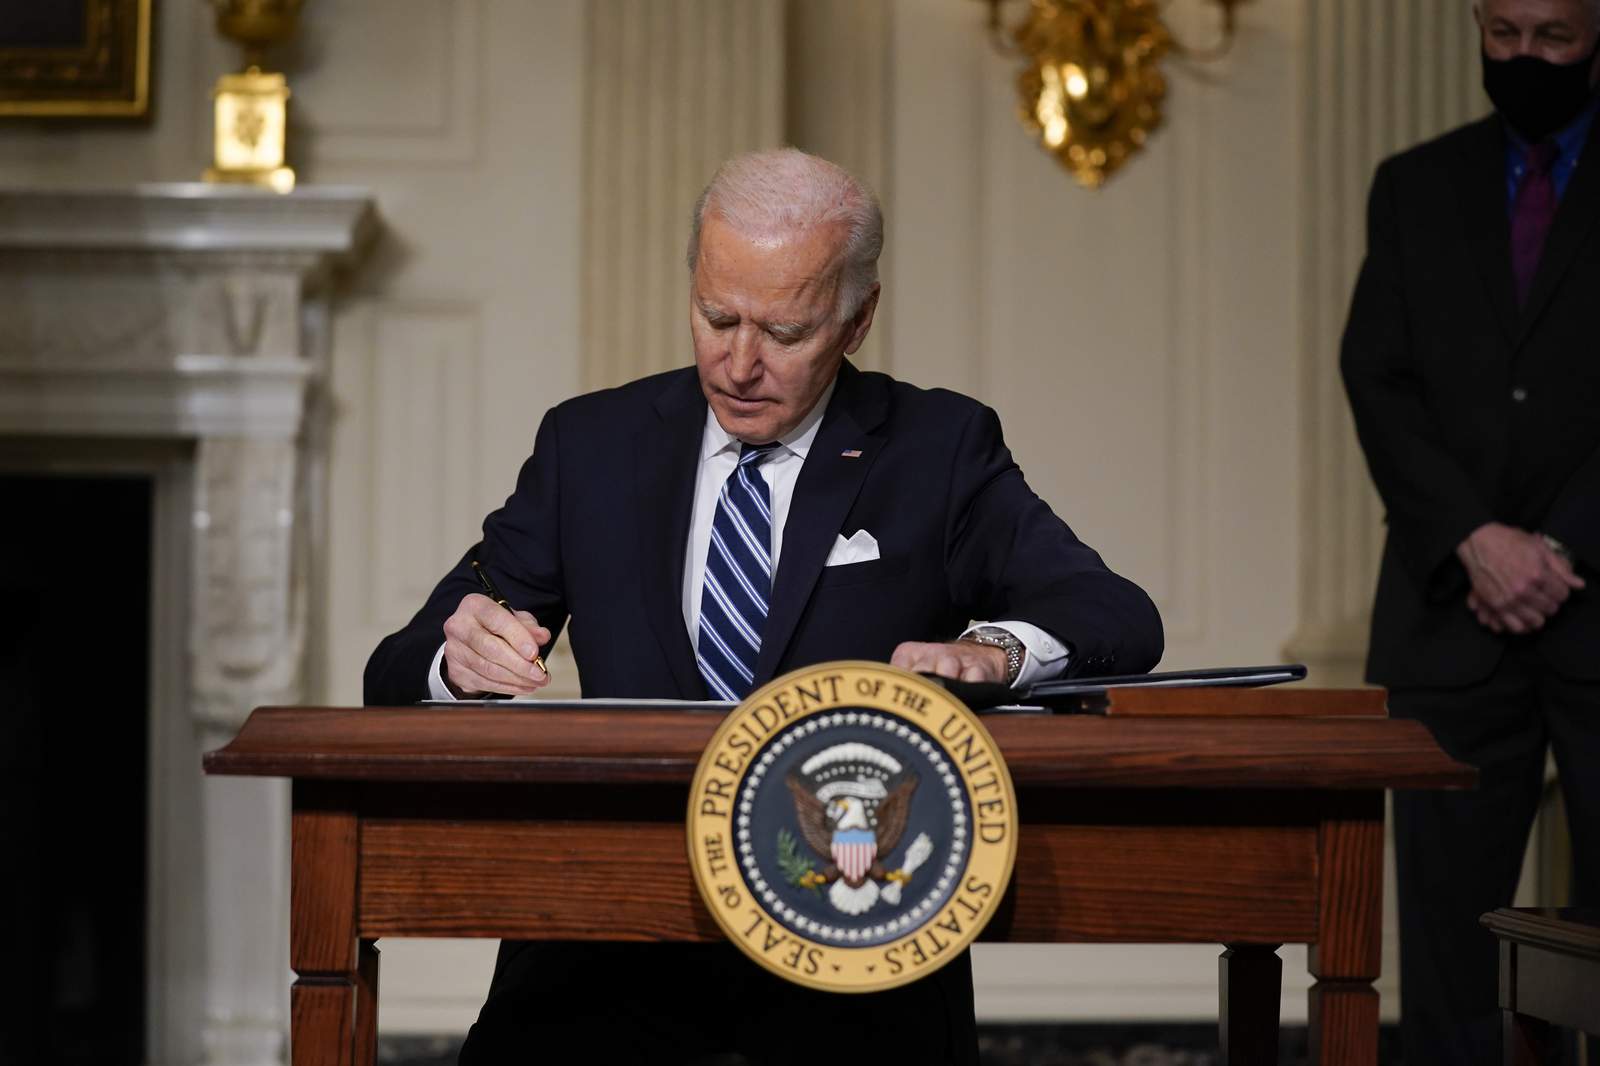 Biden: 'We can't wait any longer' to address climate crisis